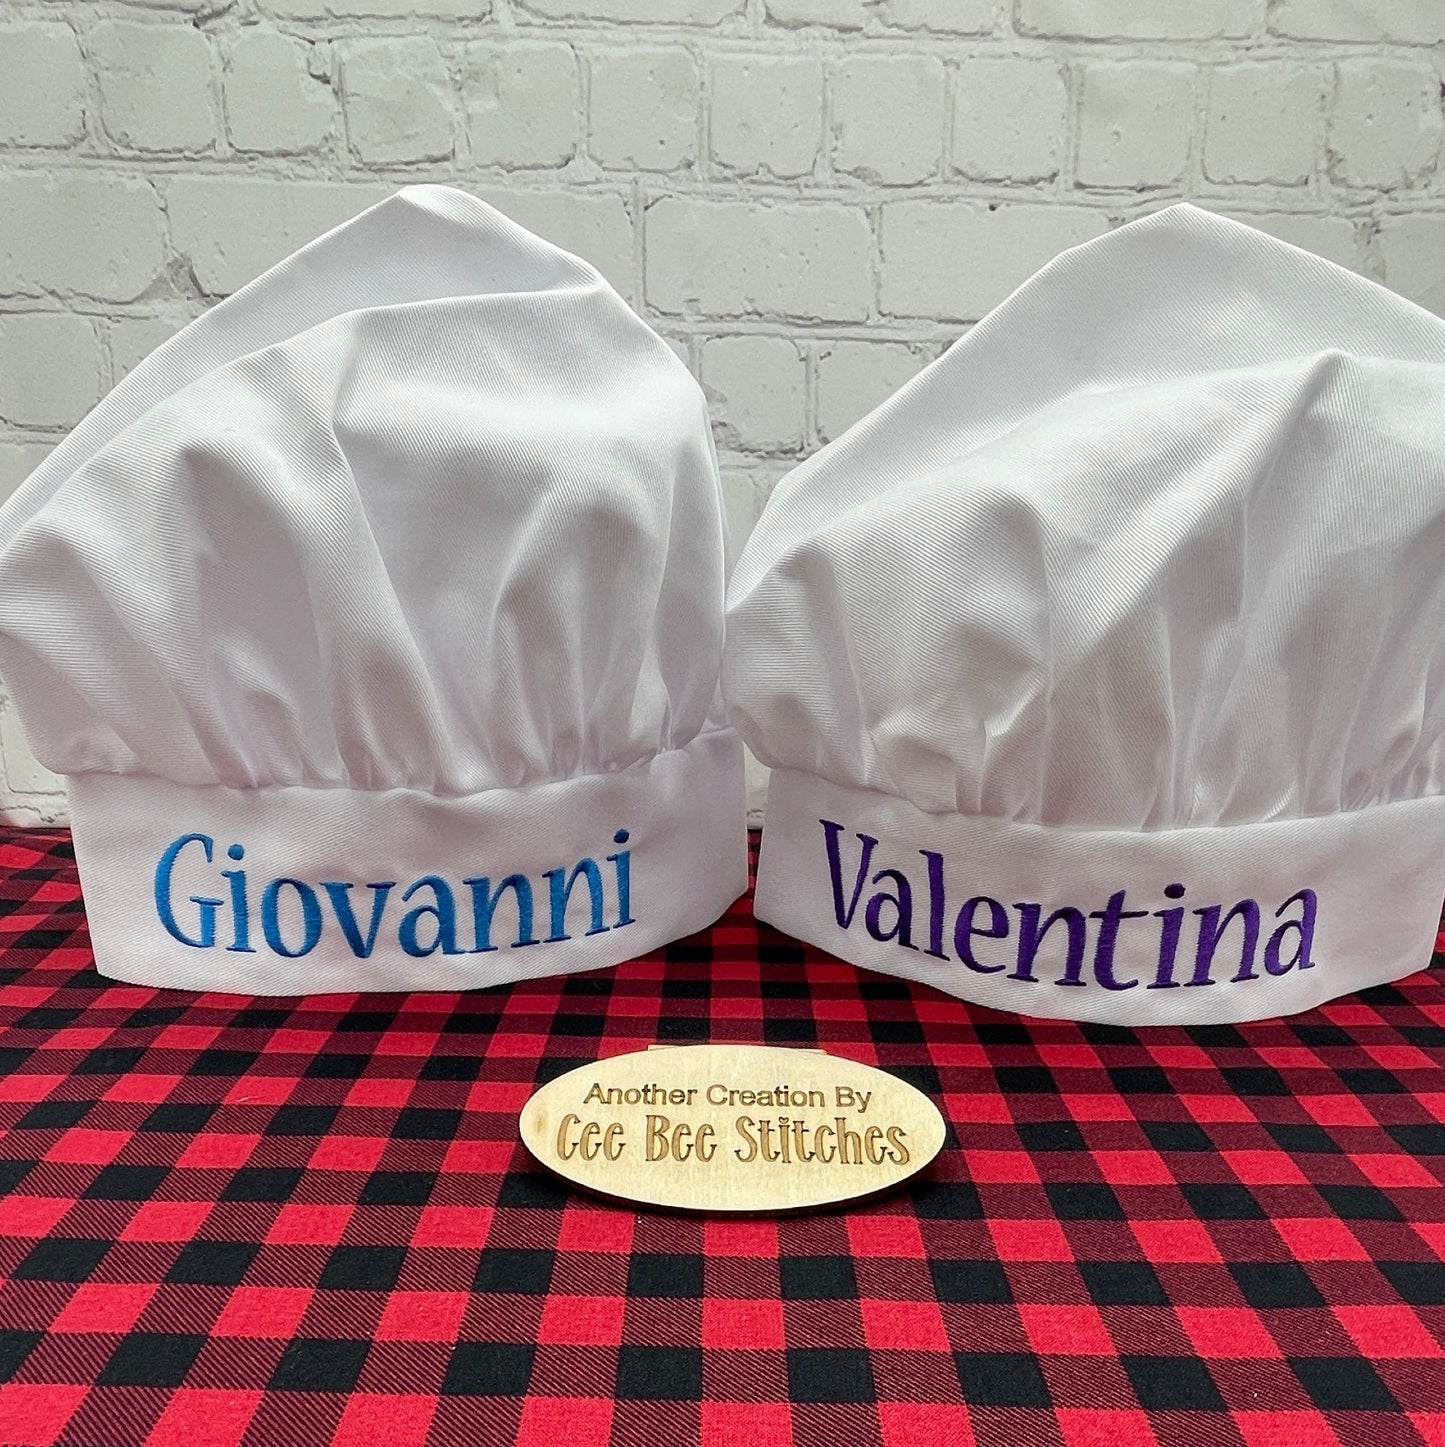 White chef hats with embroidered names in blue and purple